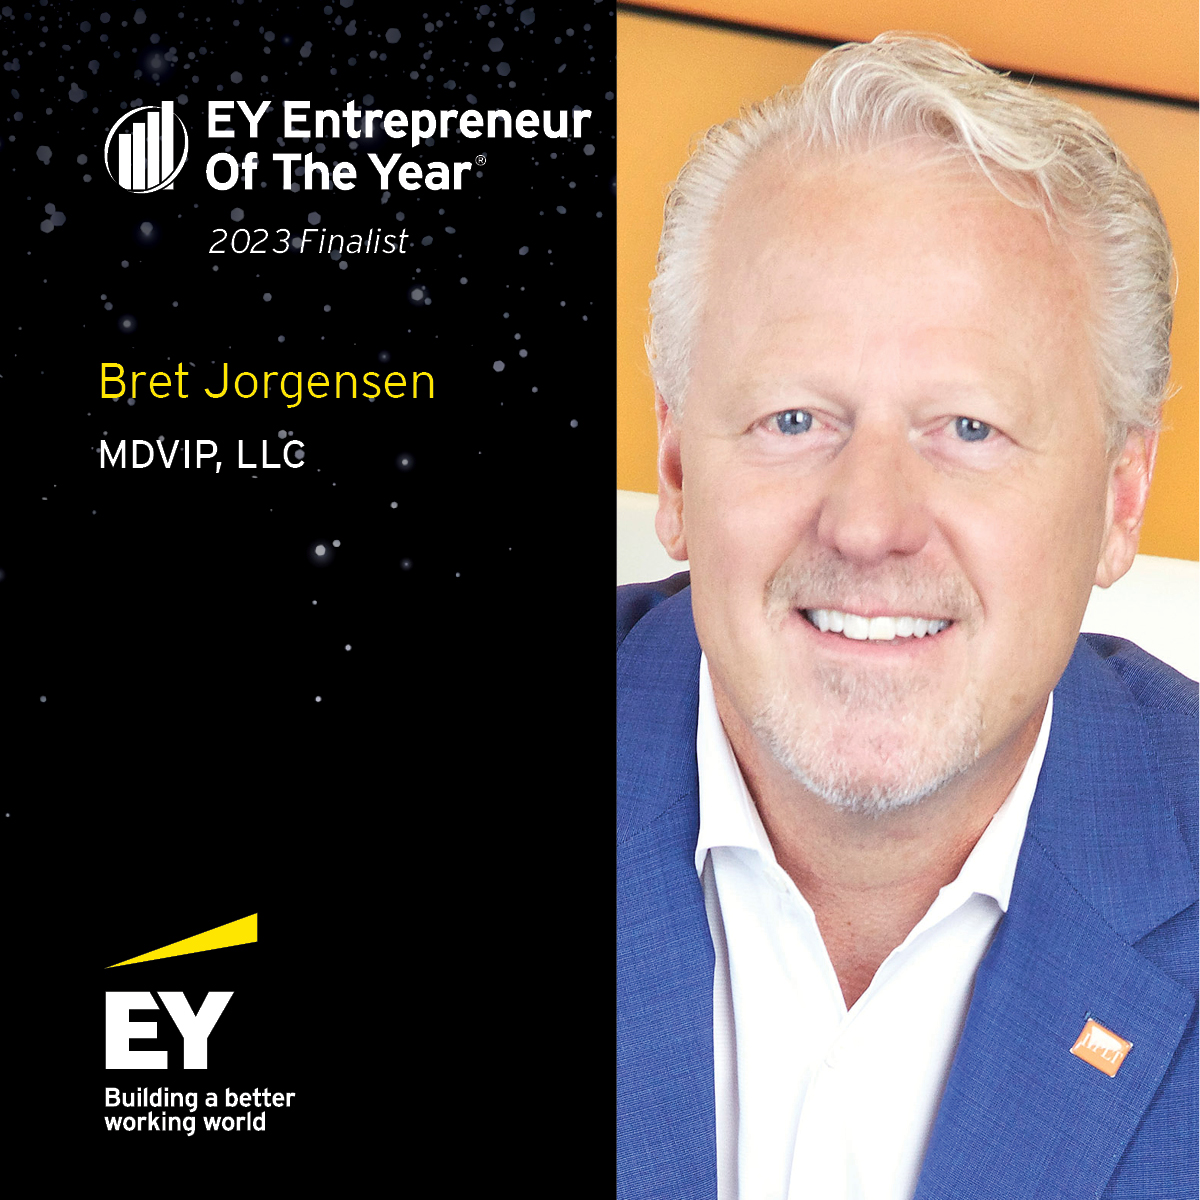 Bret Jorgensen was named Entrepreneur of the Year finalist by Ernst & Young LLP